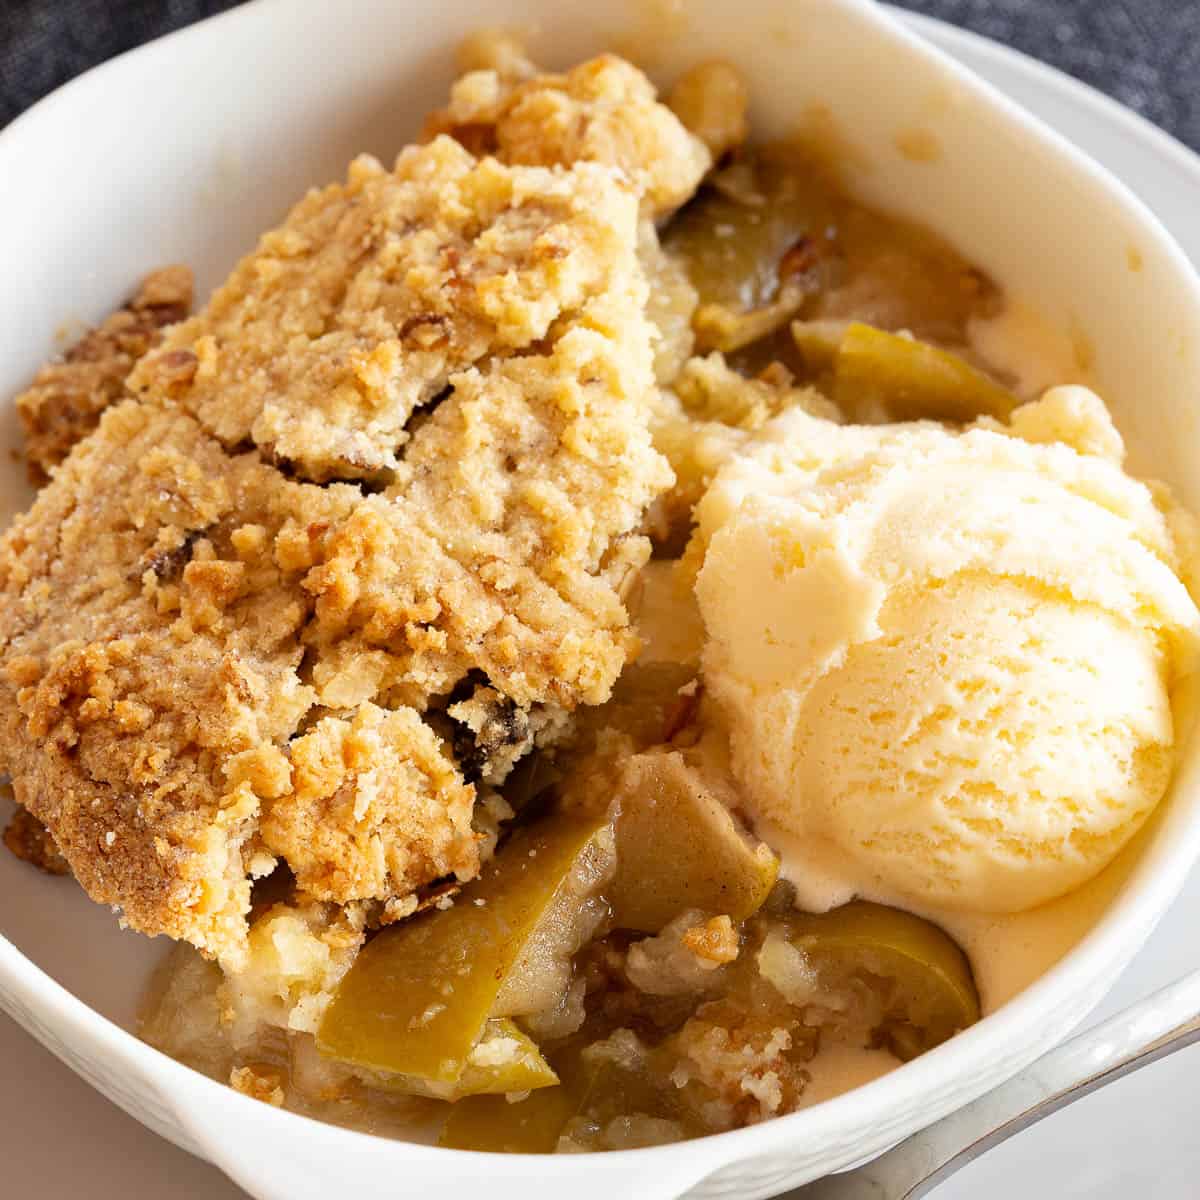 Golden apple crumble with a scoop of ice-cream in a white bowl.